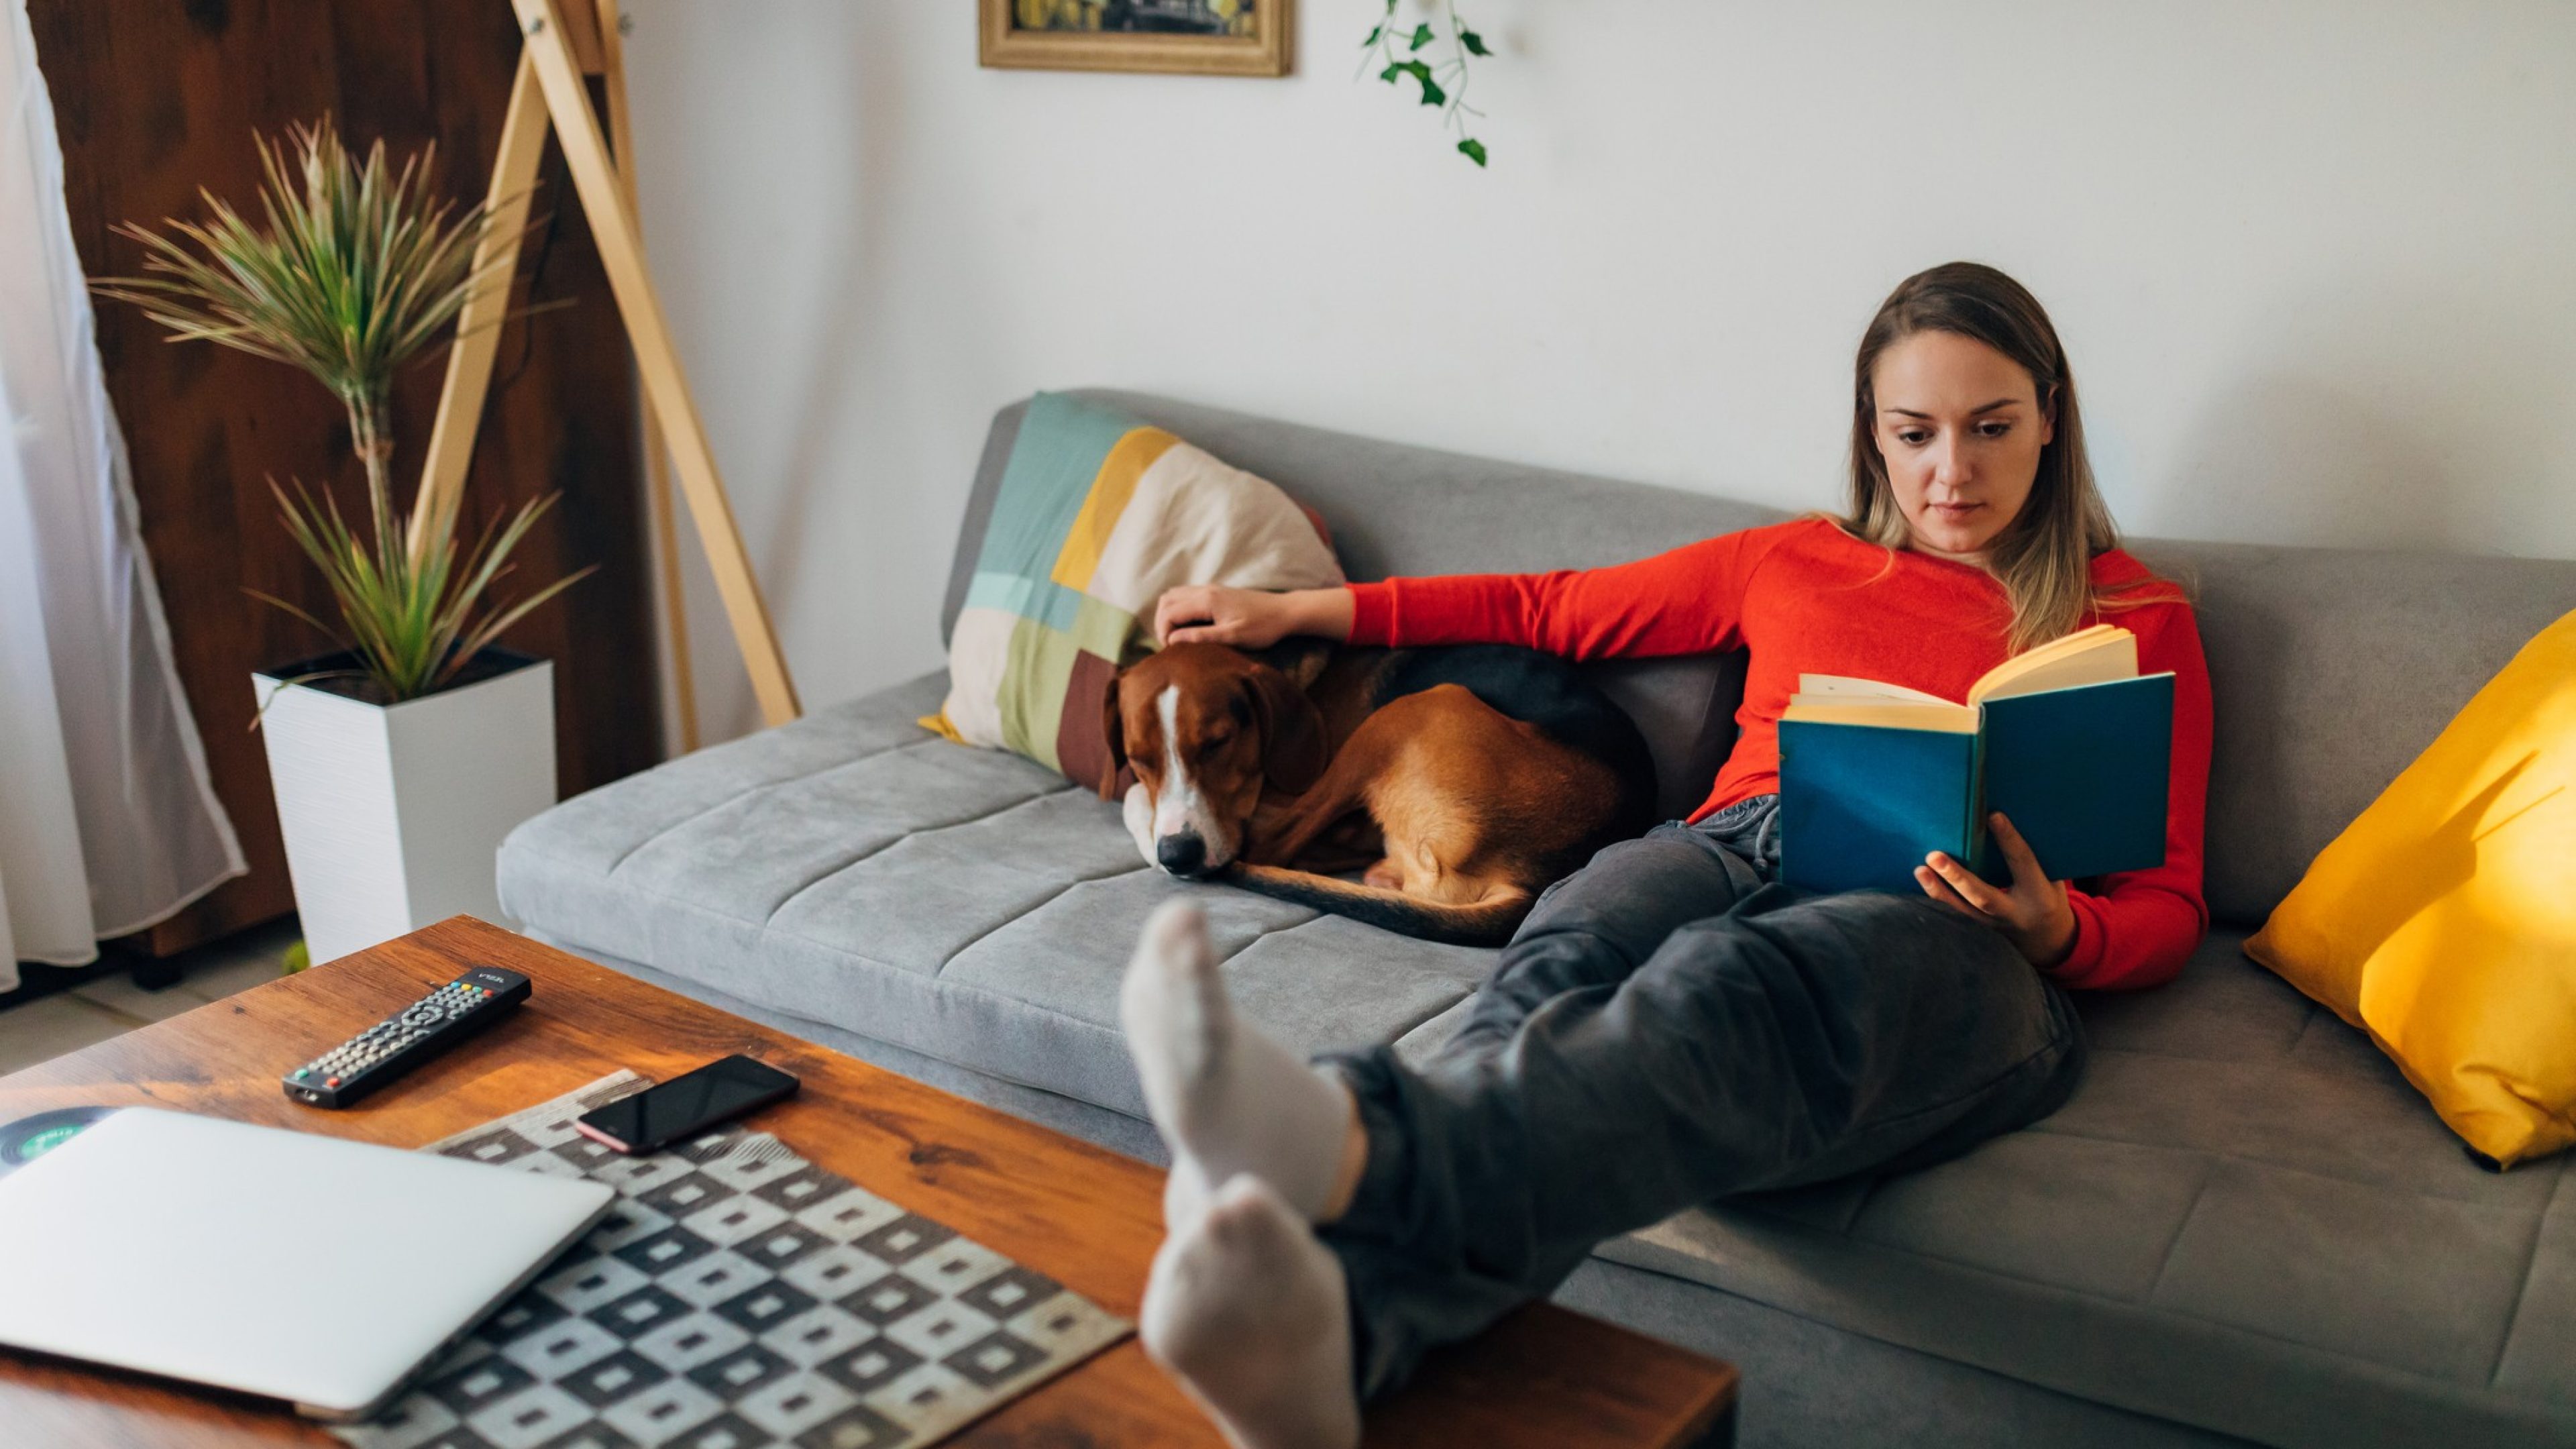 In her modern home, young woman sitting on the cozy sofa, and reading analog book, while stroking her cute male mixed-breed dog, enjoying her weekend int he right way